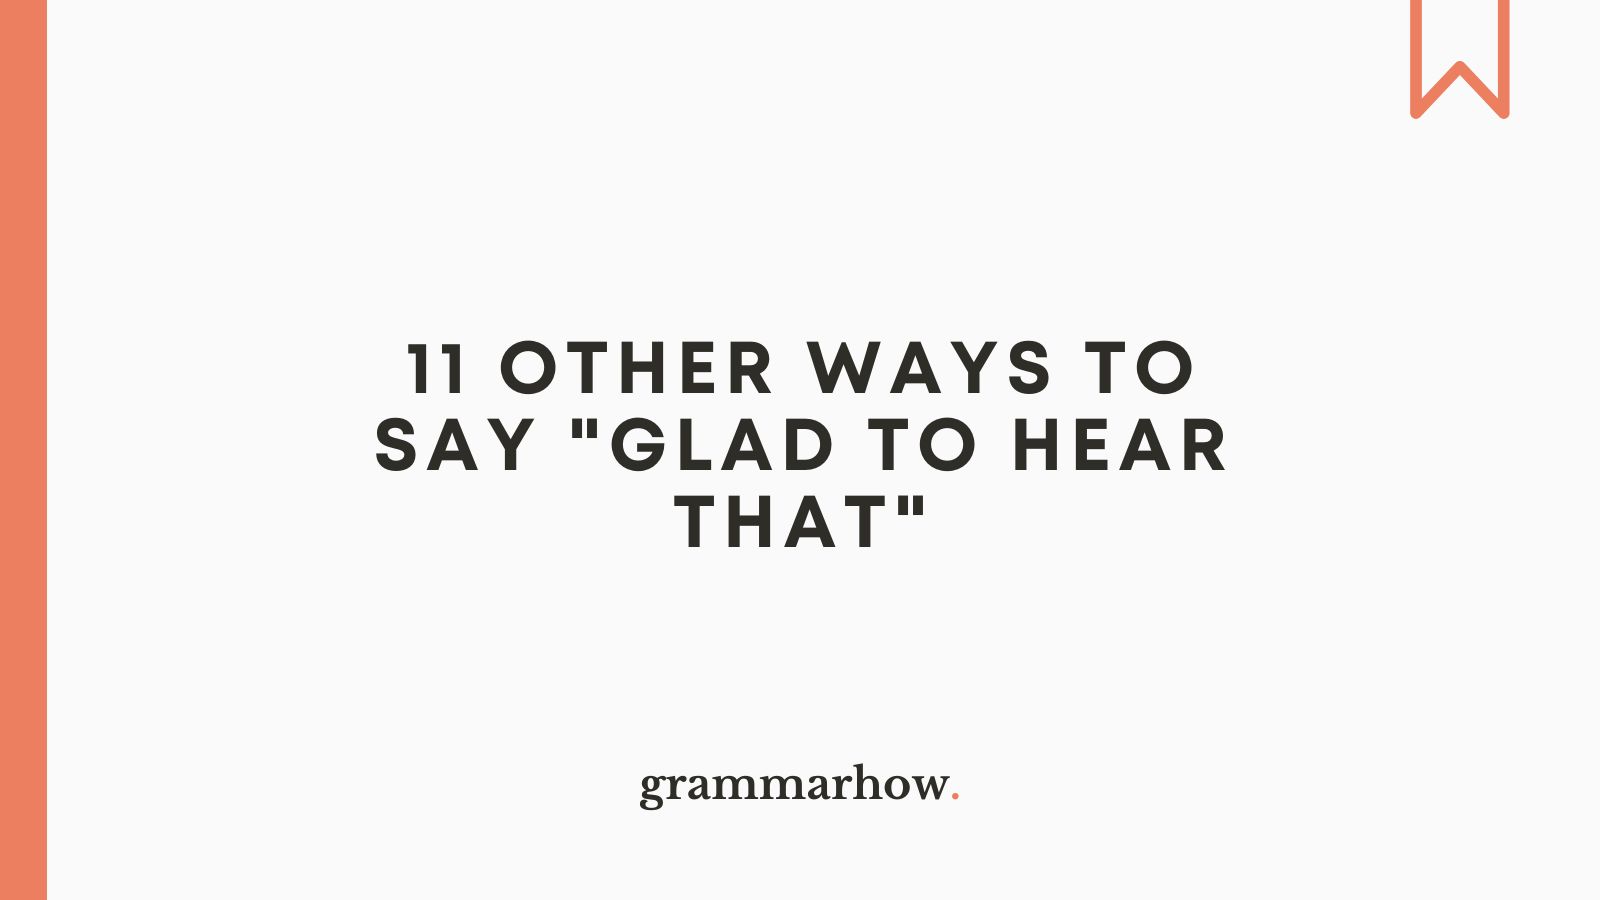 11 Other Ways to Say “Glad to Hear That”